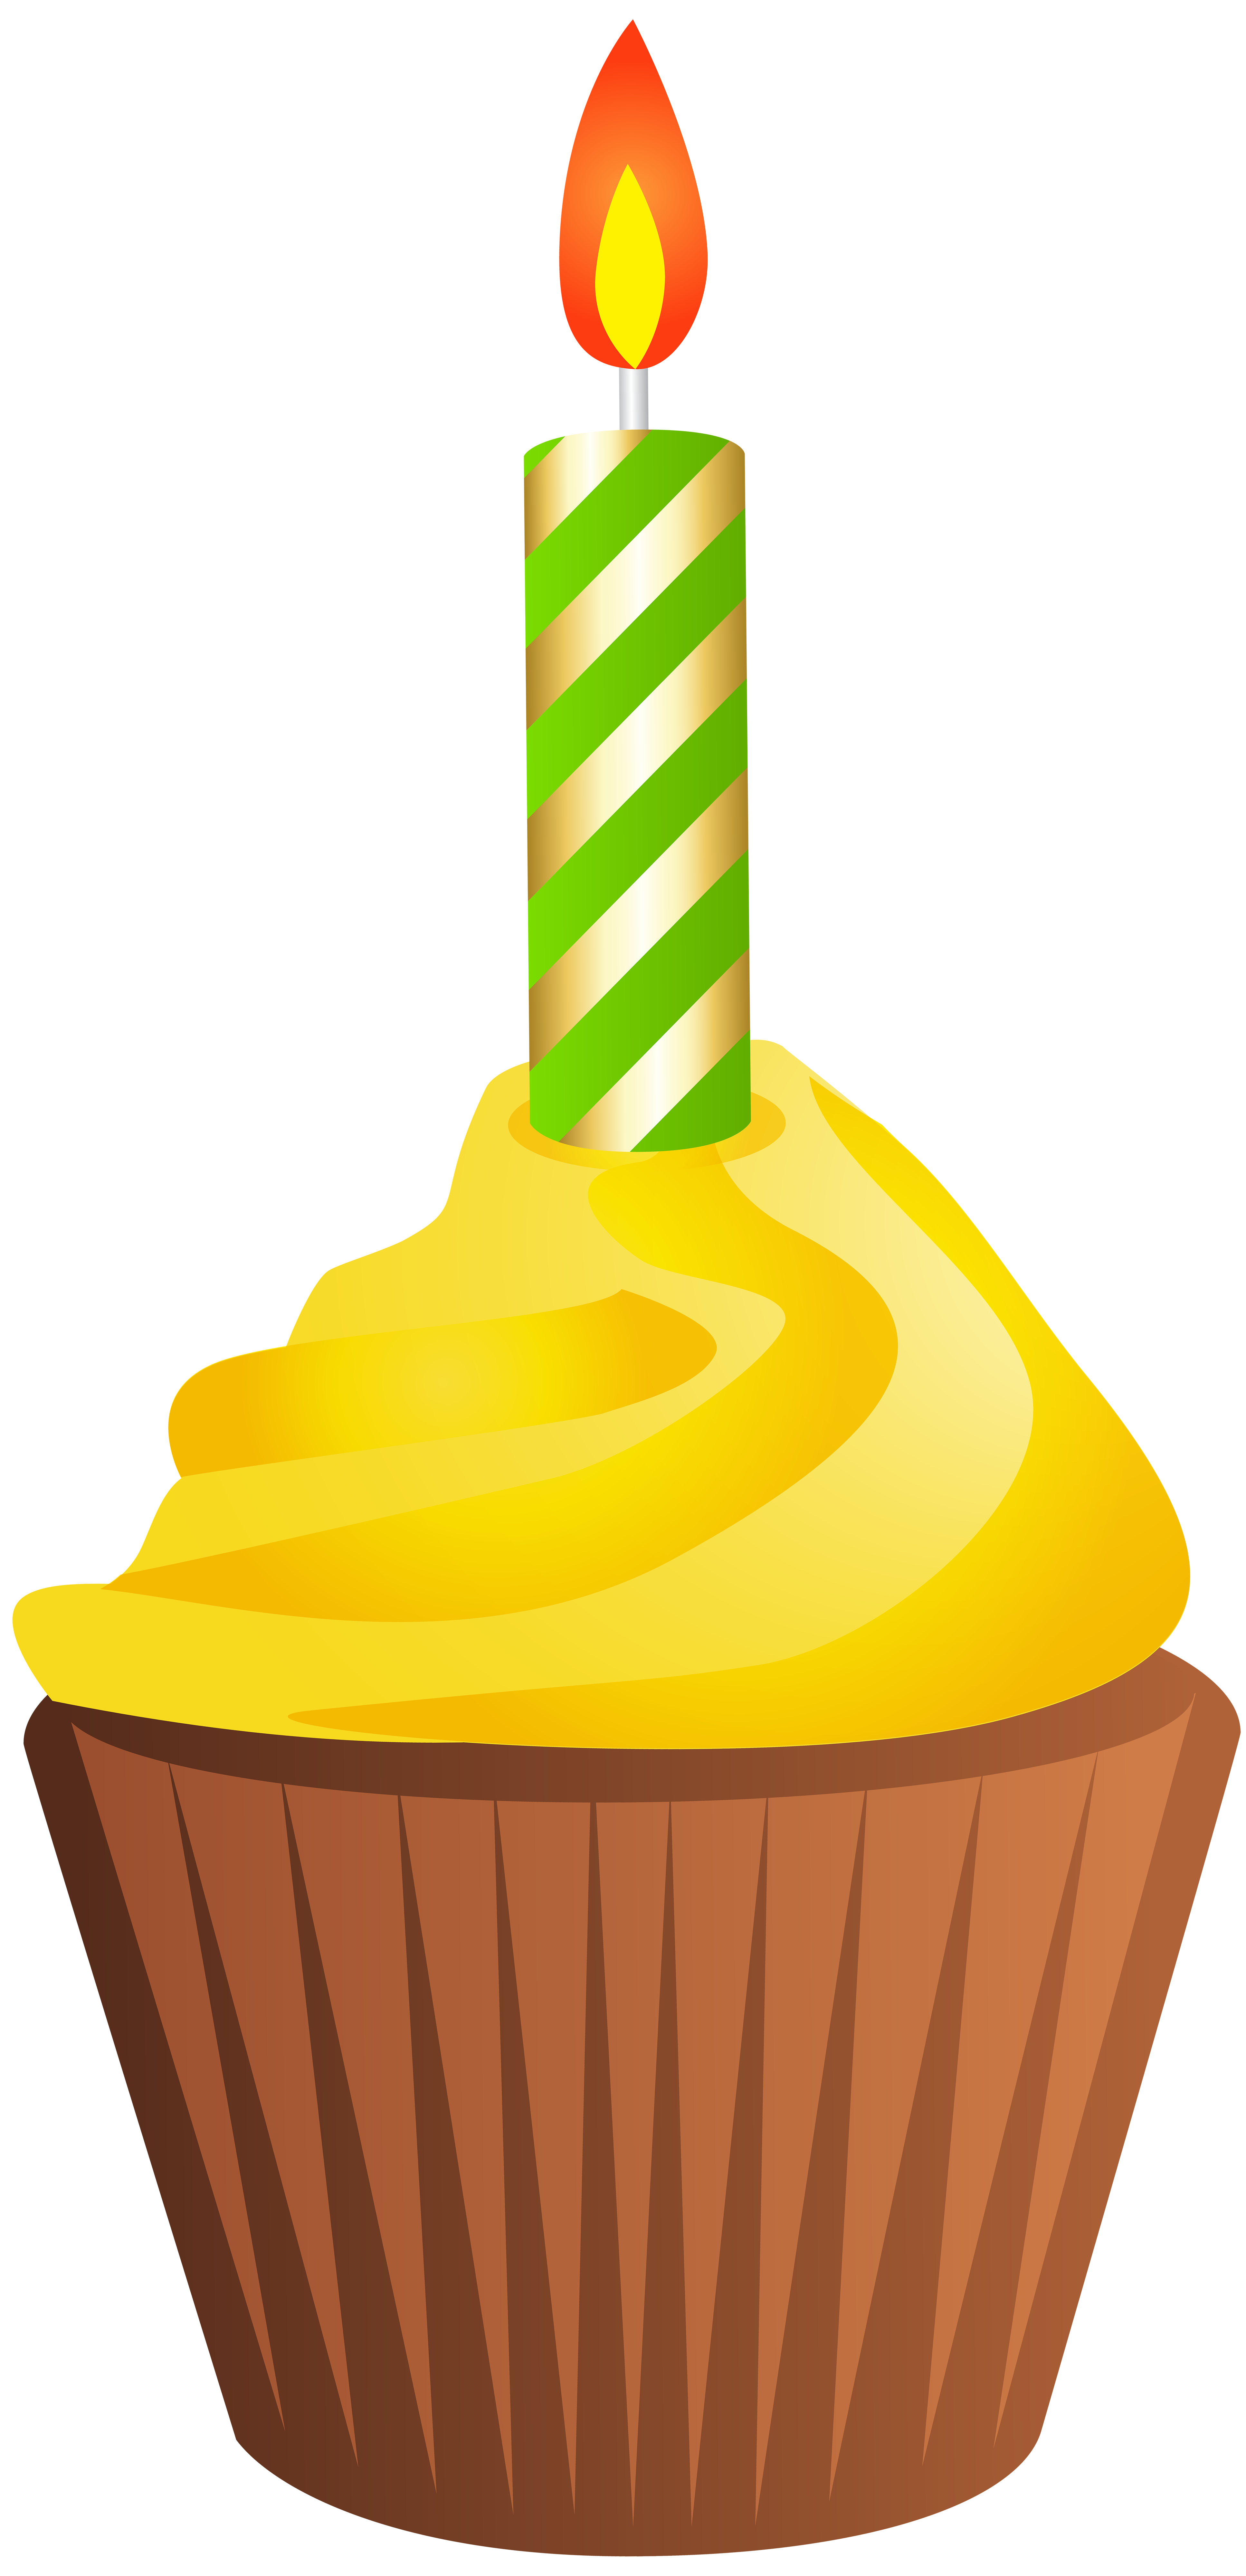 Muffins clipart ckae. Birthday muffin with candle